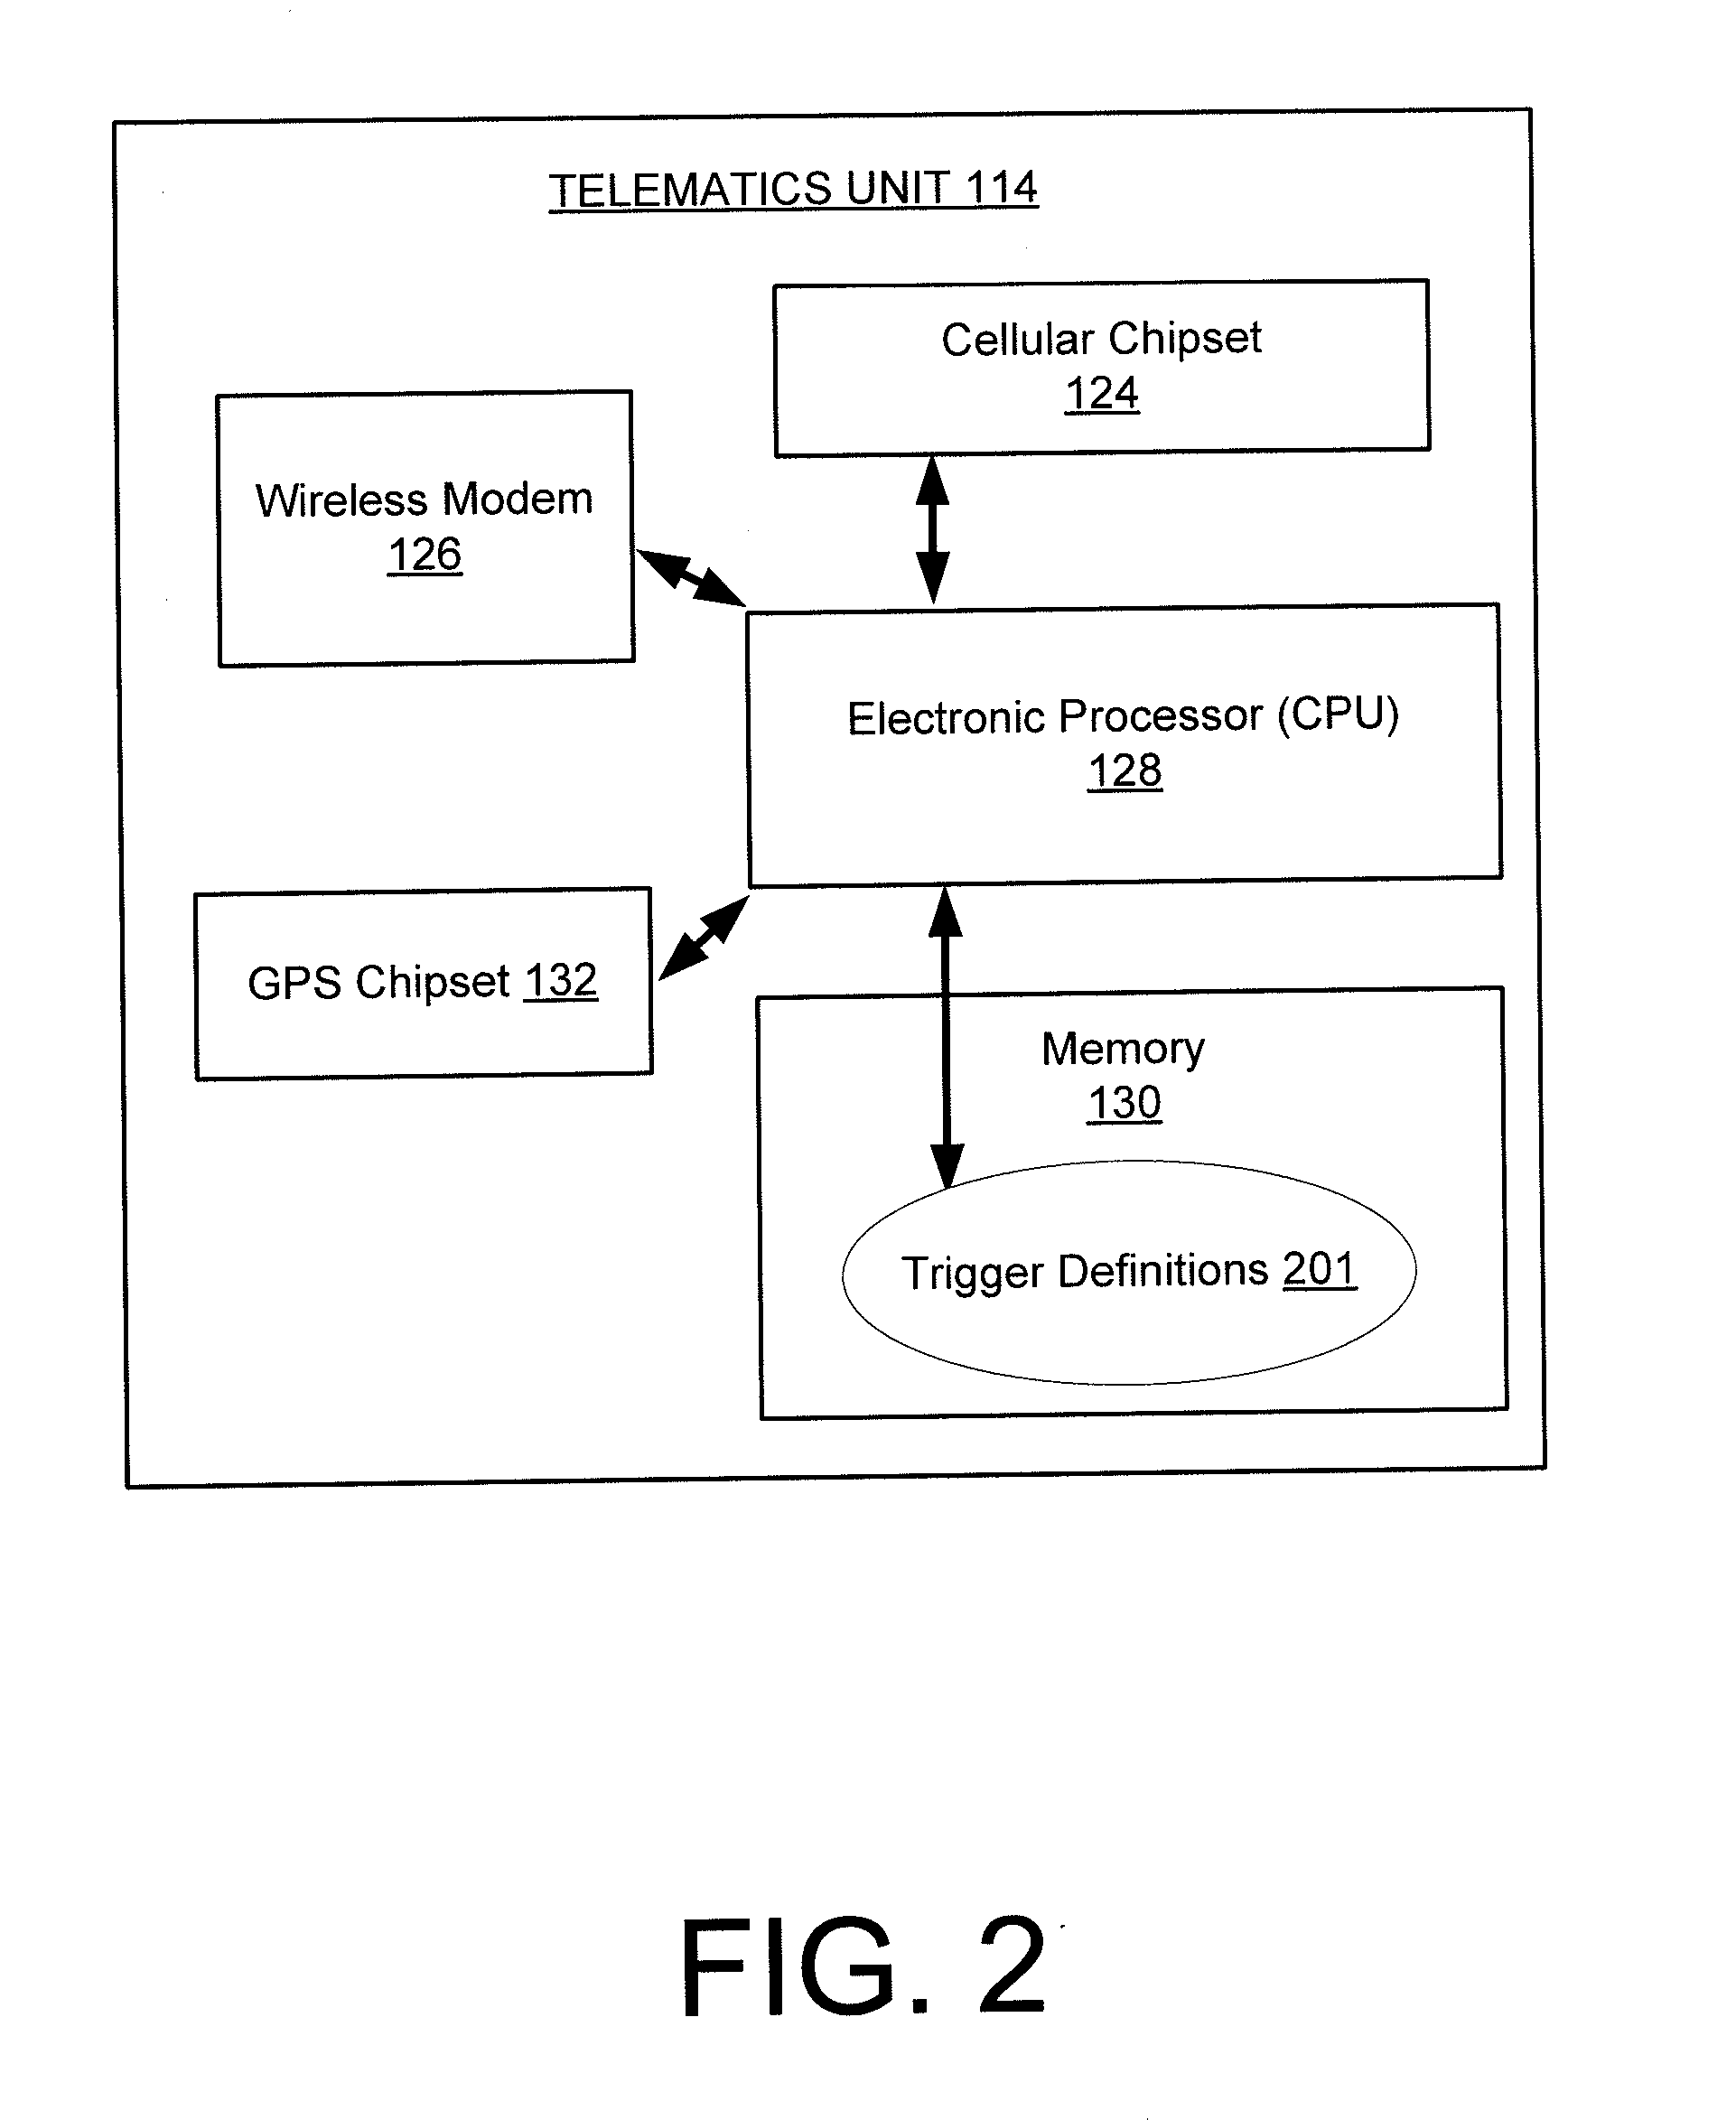 Enhanced mobile network system acquisition using scanning triggers